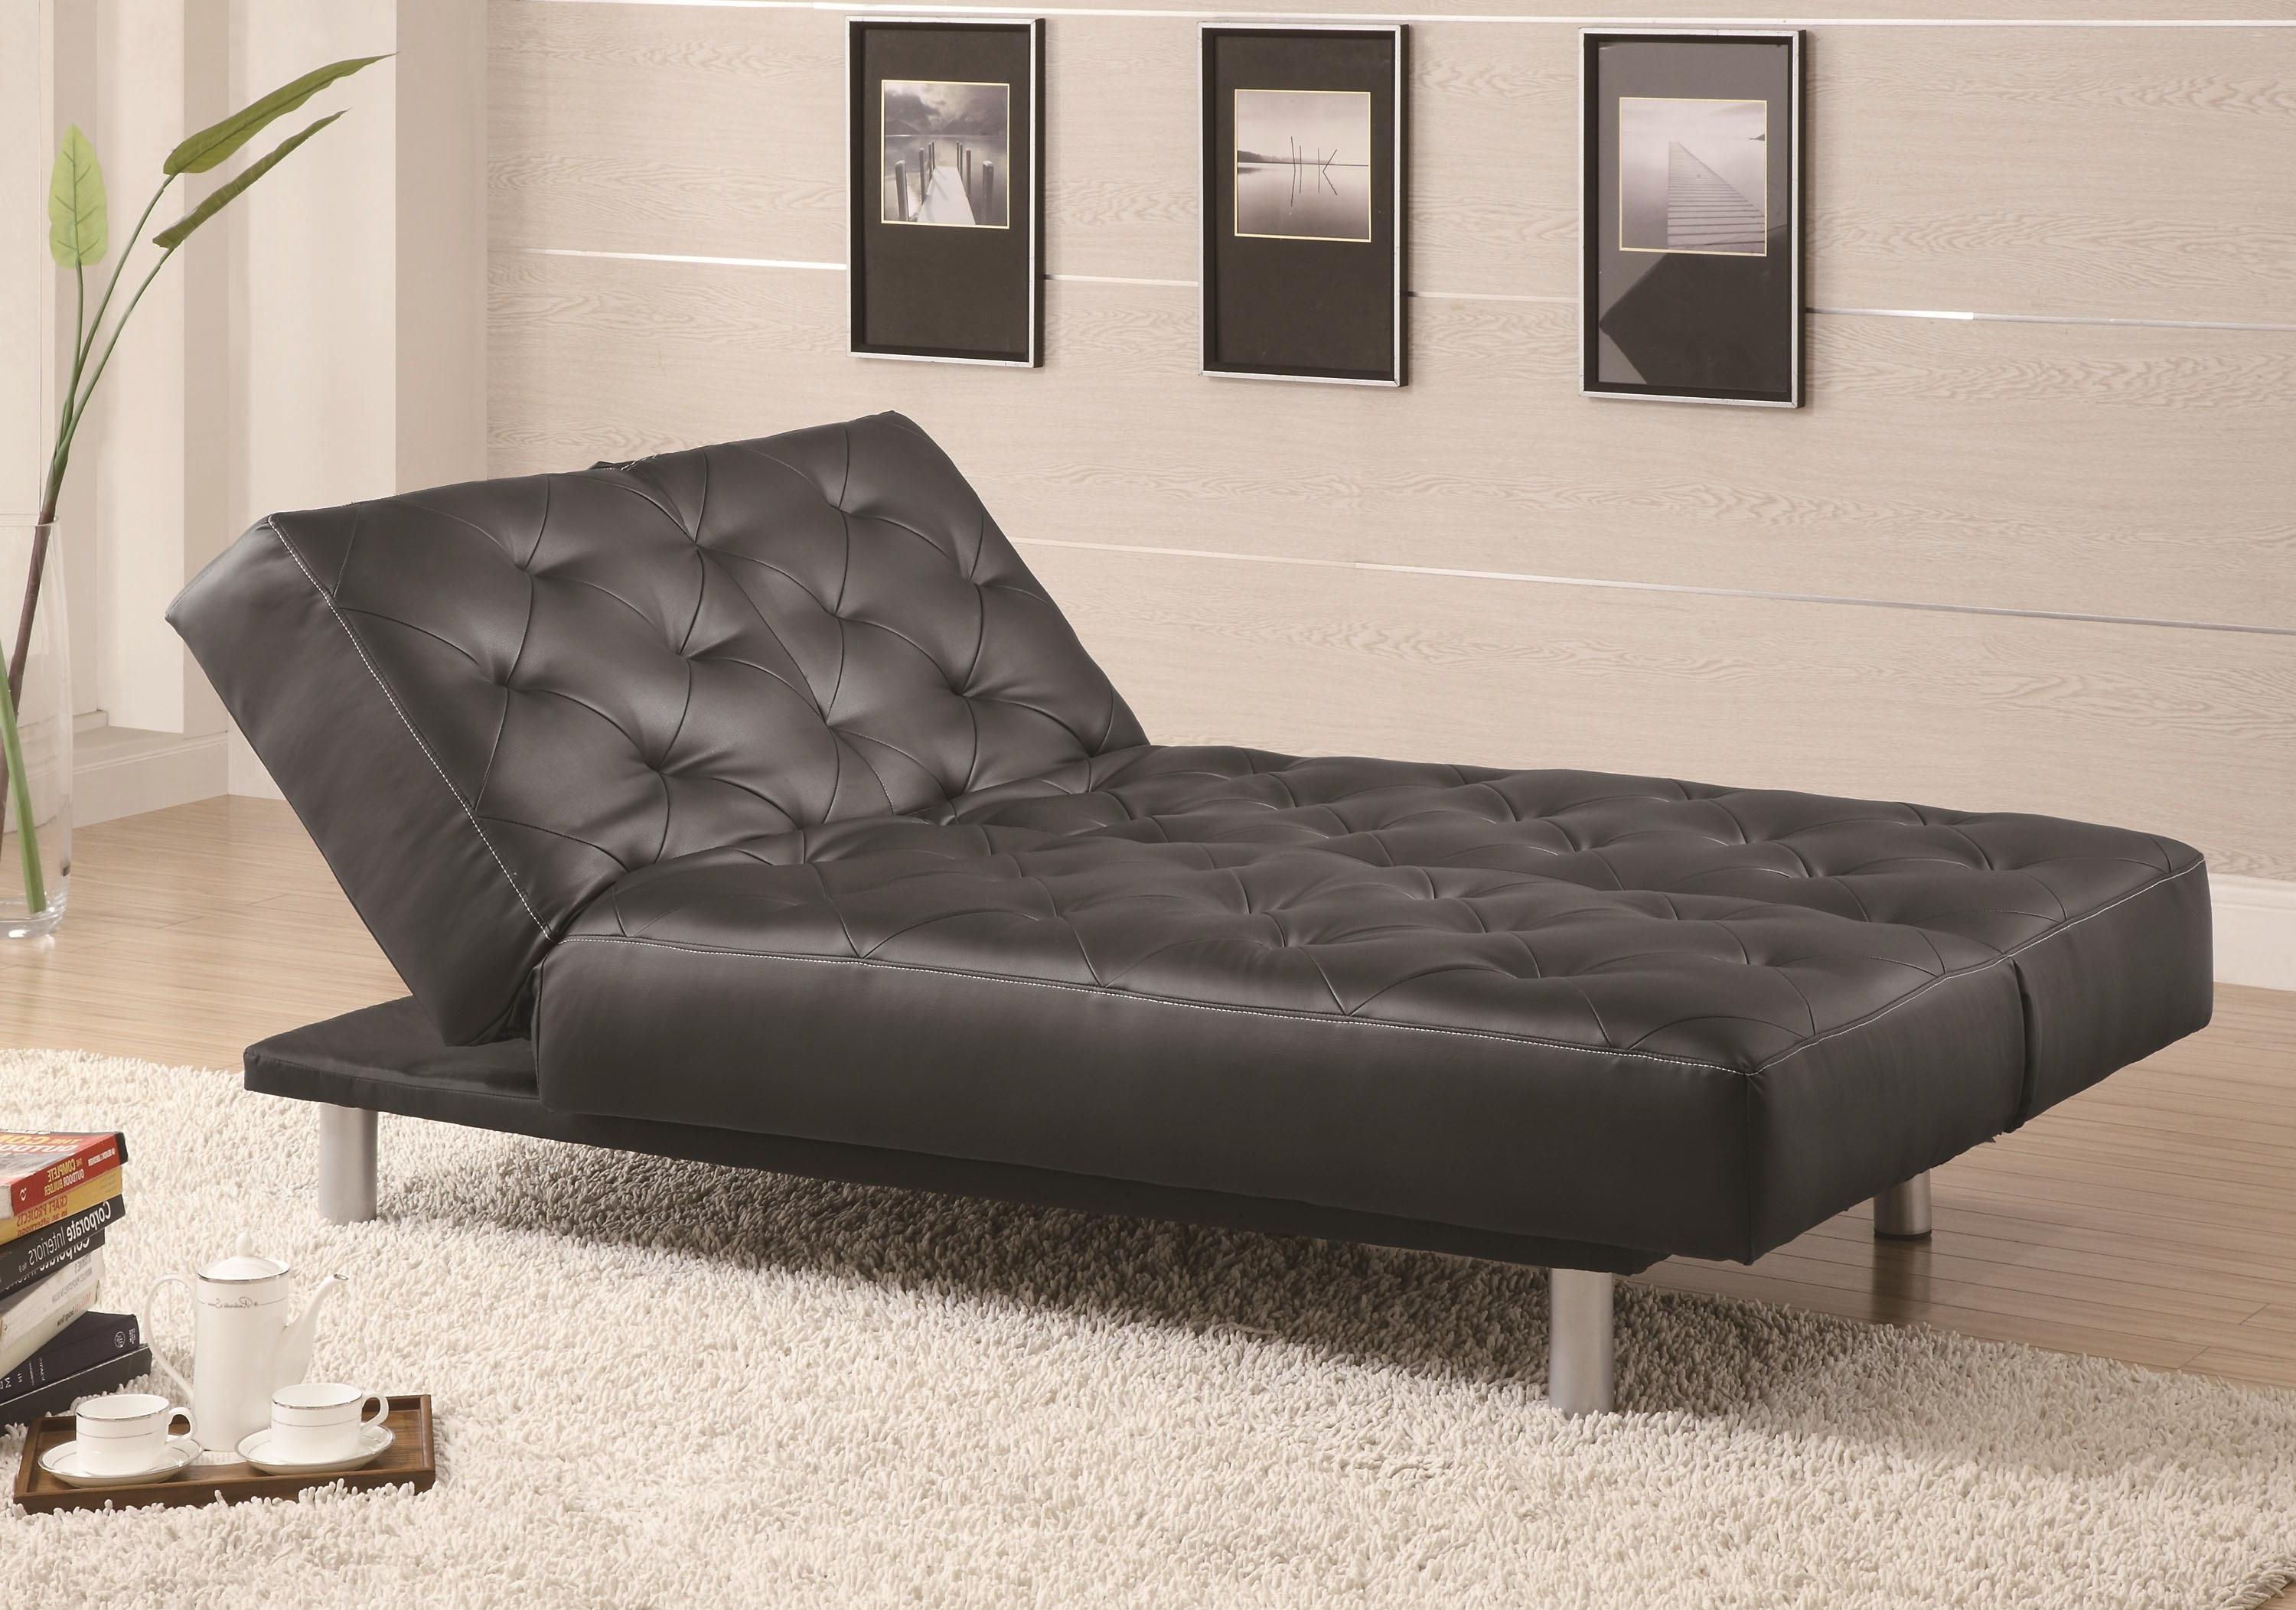 2017 Futon Chaise Lounges With Regard To Coaster Sofa Beds And Futons Black Vinyl Tufted Sofa Bed/oversize (View 9 of 15)